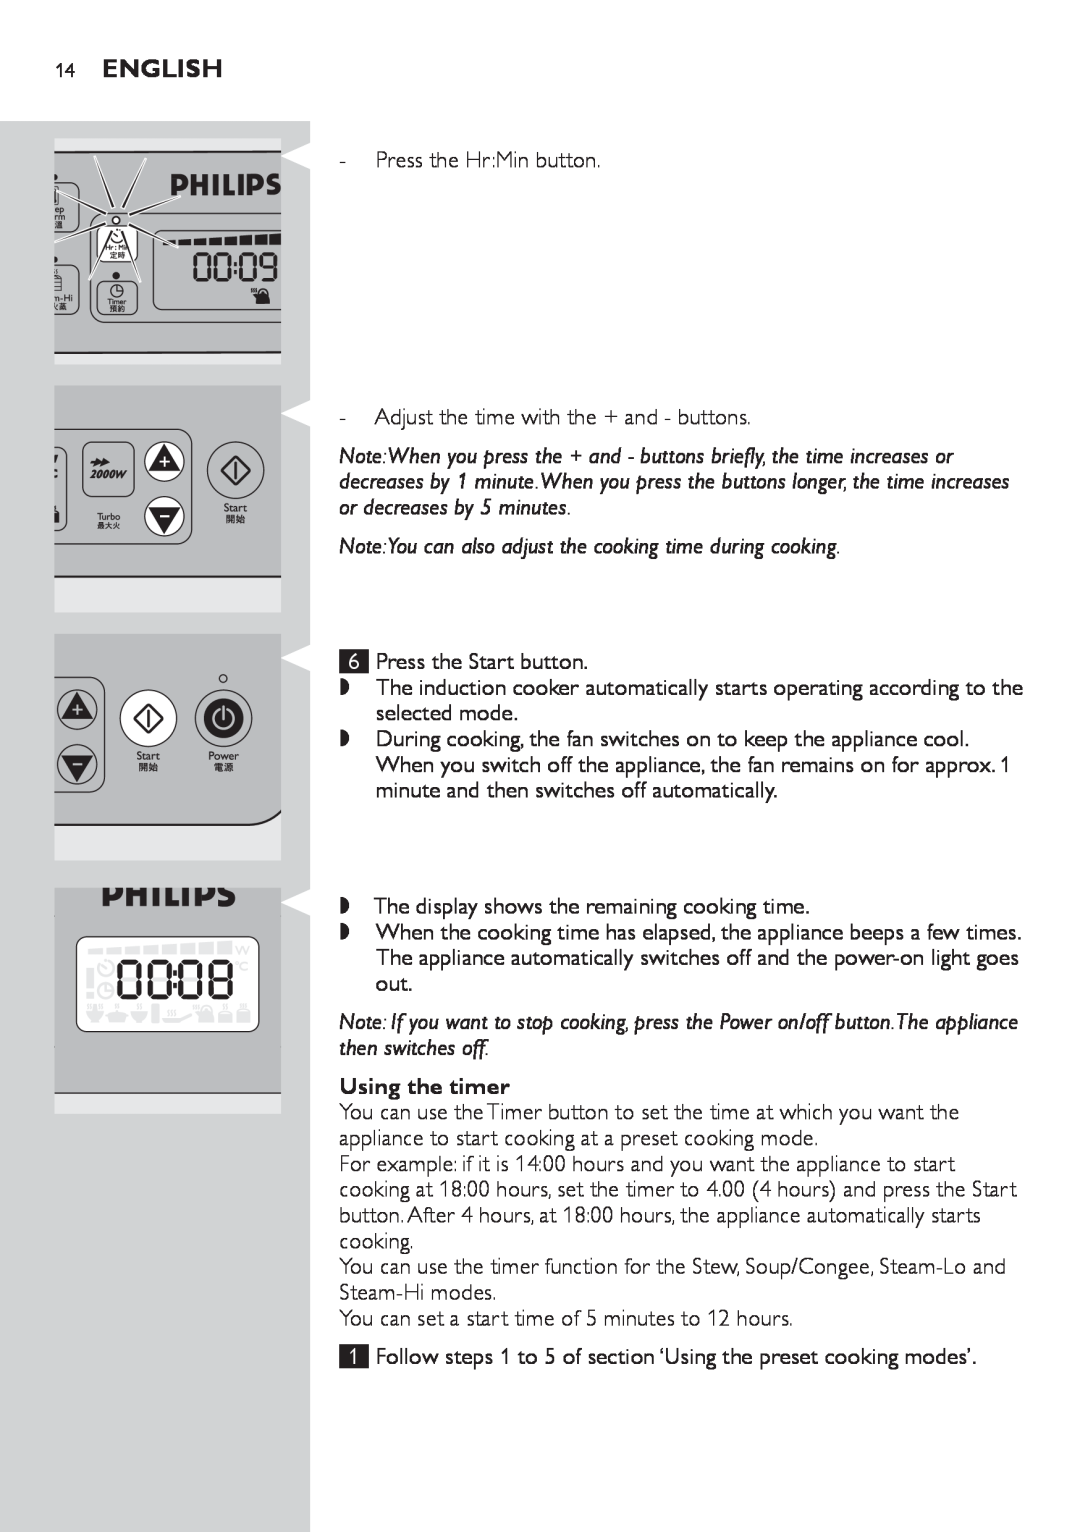 Philips HD4918 manual English, Using the timer 